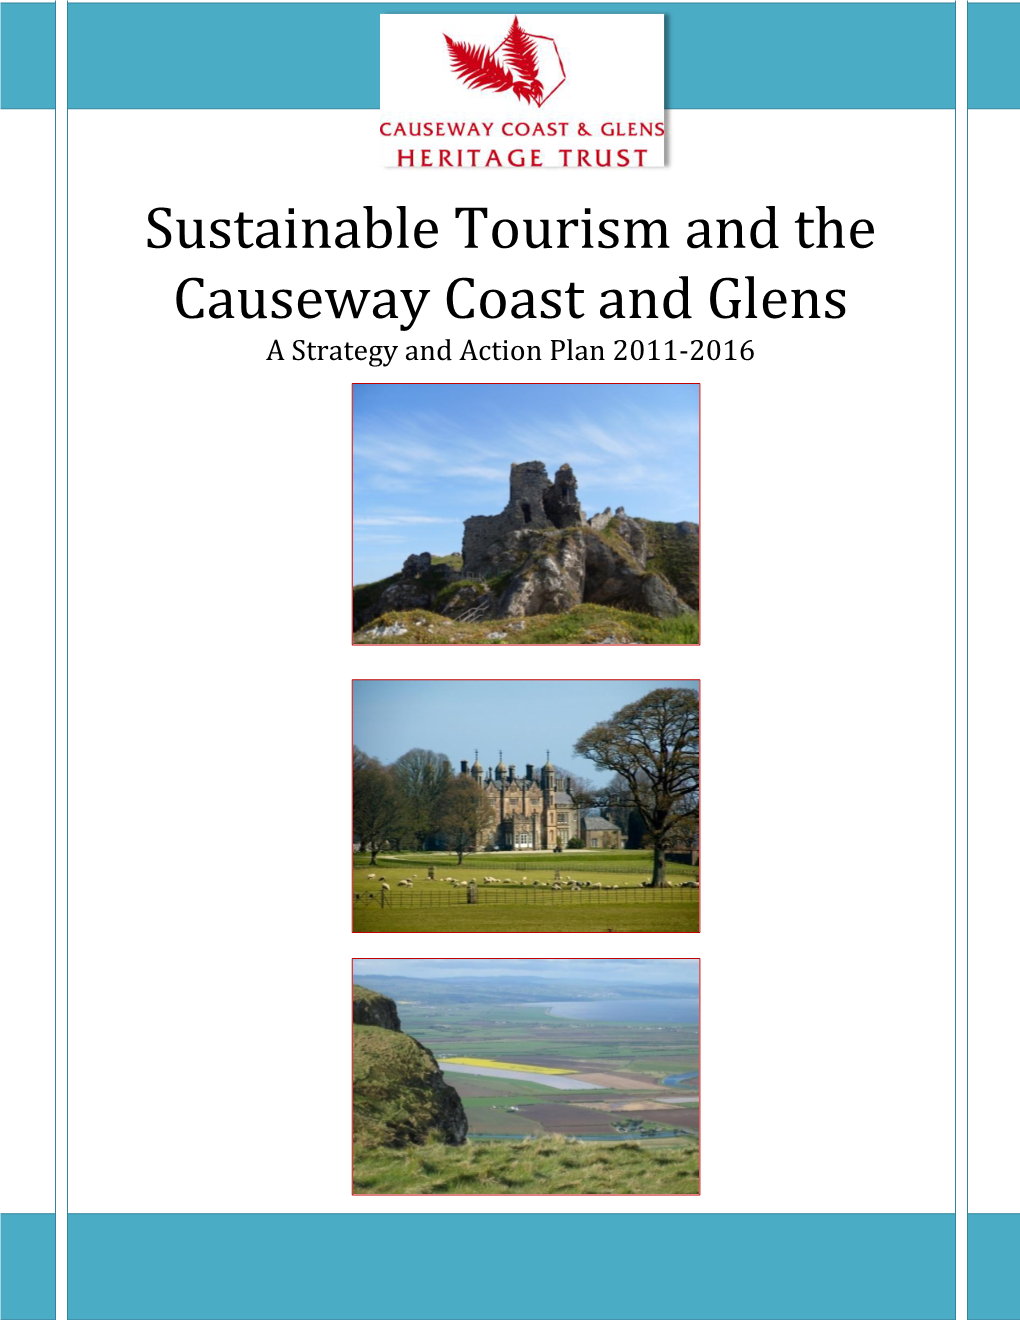 Sustainable Tourism and the Causeway Coast and Glens a Strategy and Action Plan 2011-2016